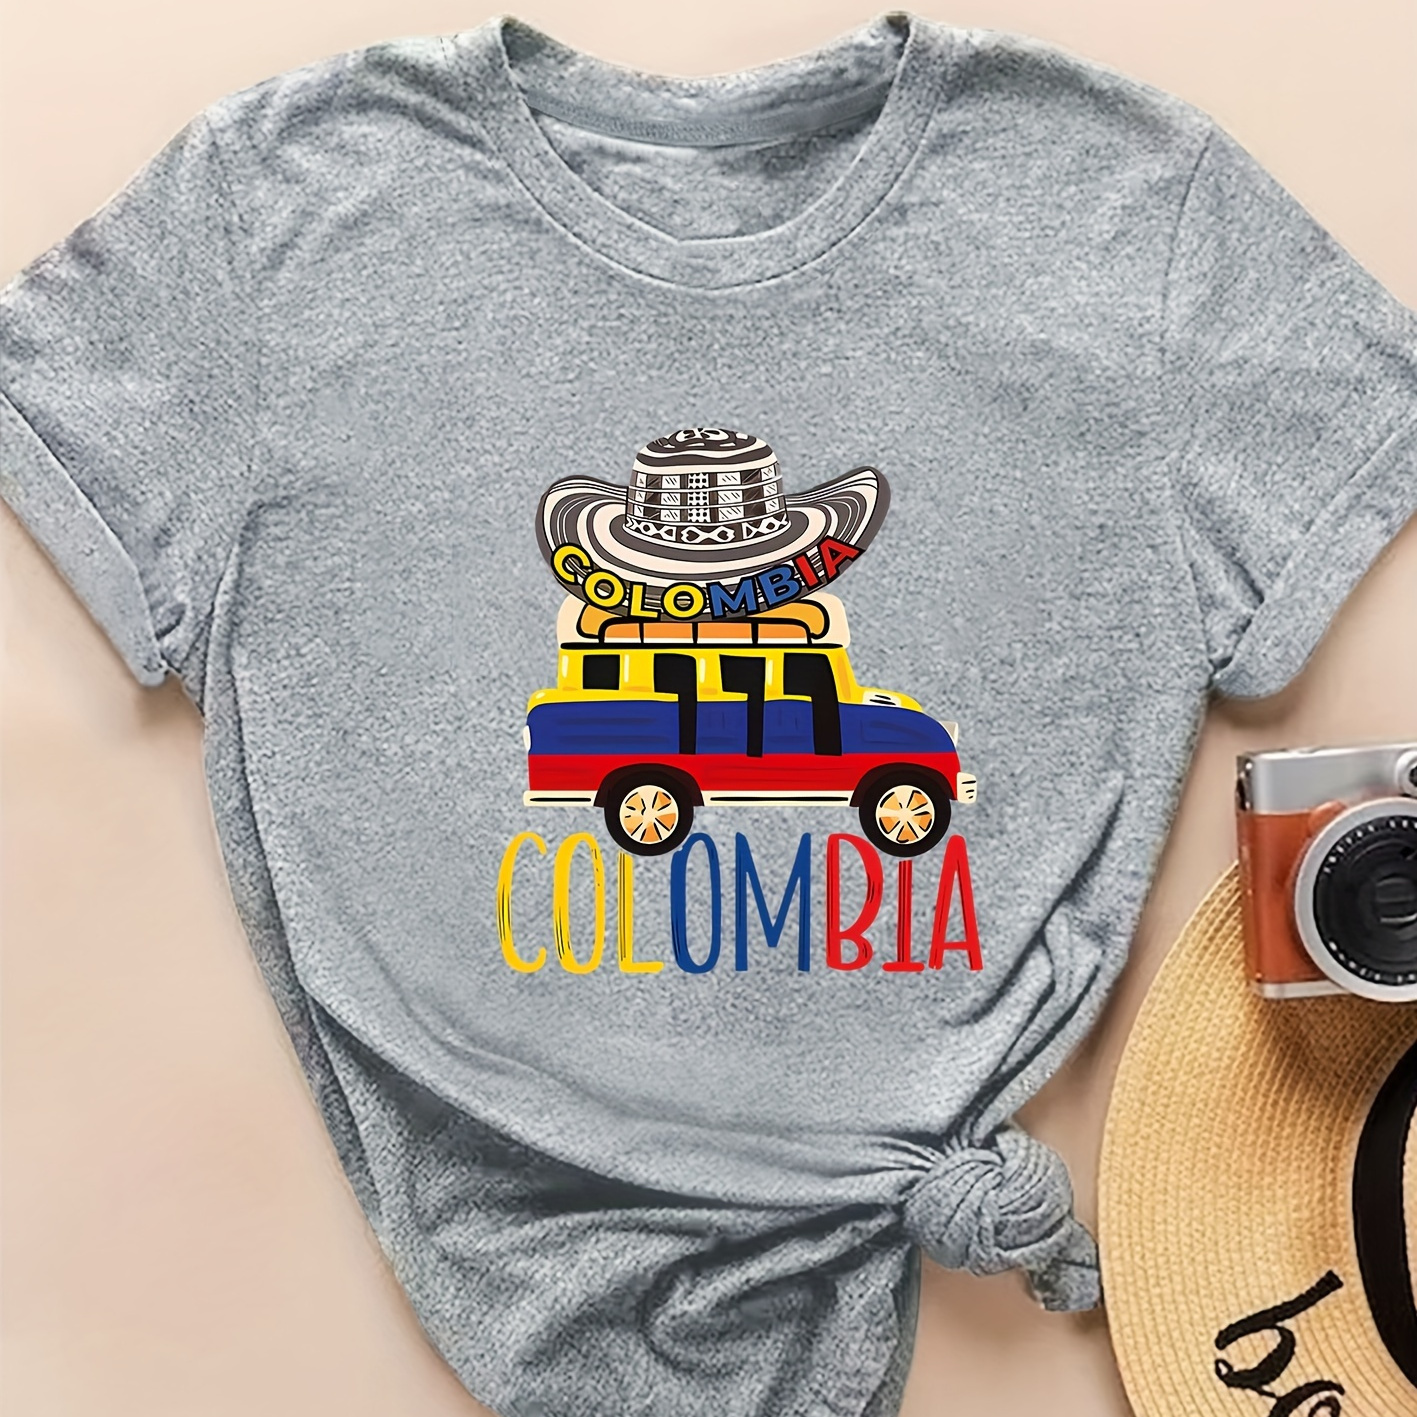 

Women's Colombia Themed T-shirt, Short Sleeve, Round Neck, Retro Style, Vintage Hat And Car Print With Letters, Casual Spring/summer Top